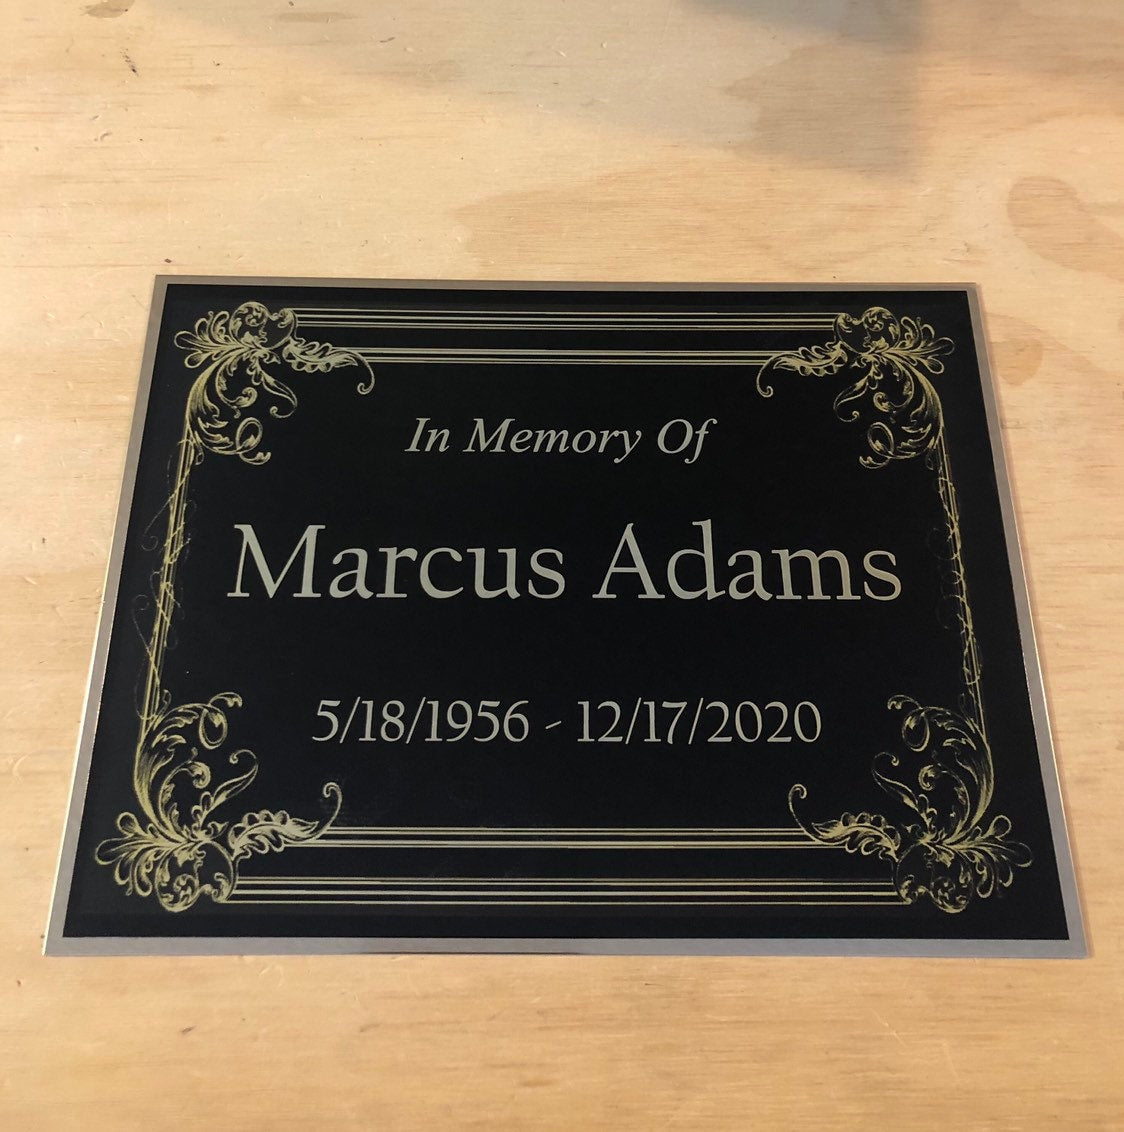 XL Cremation Urn Name Plate 8" x 6" Custom Engraved Memorial Urn Tag Plaque Black/Gold Backing Engraved Urn Name Plate In Loving Memory of